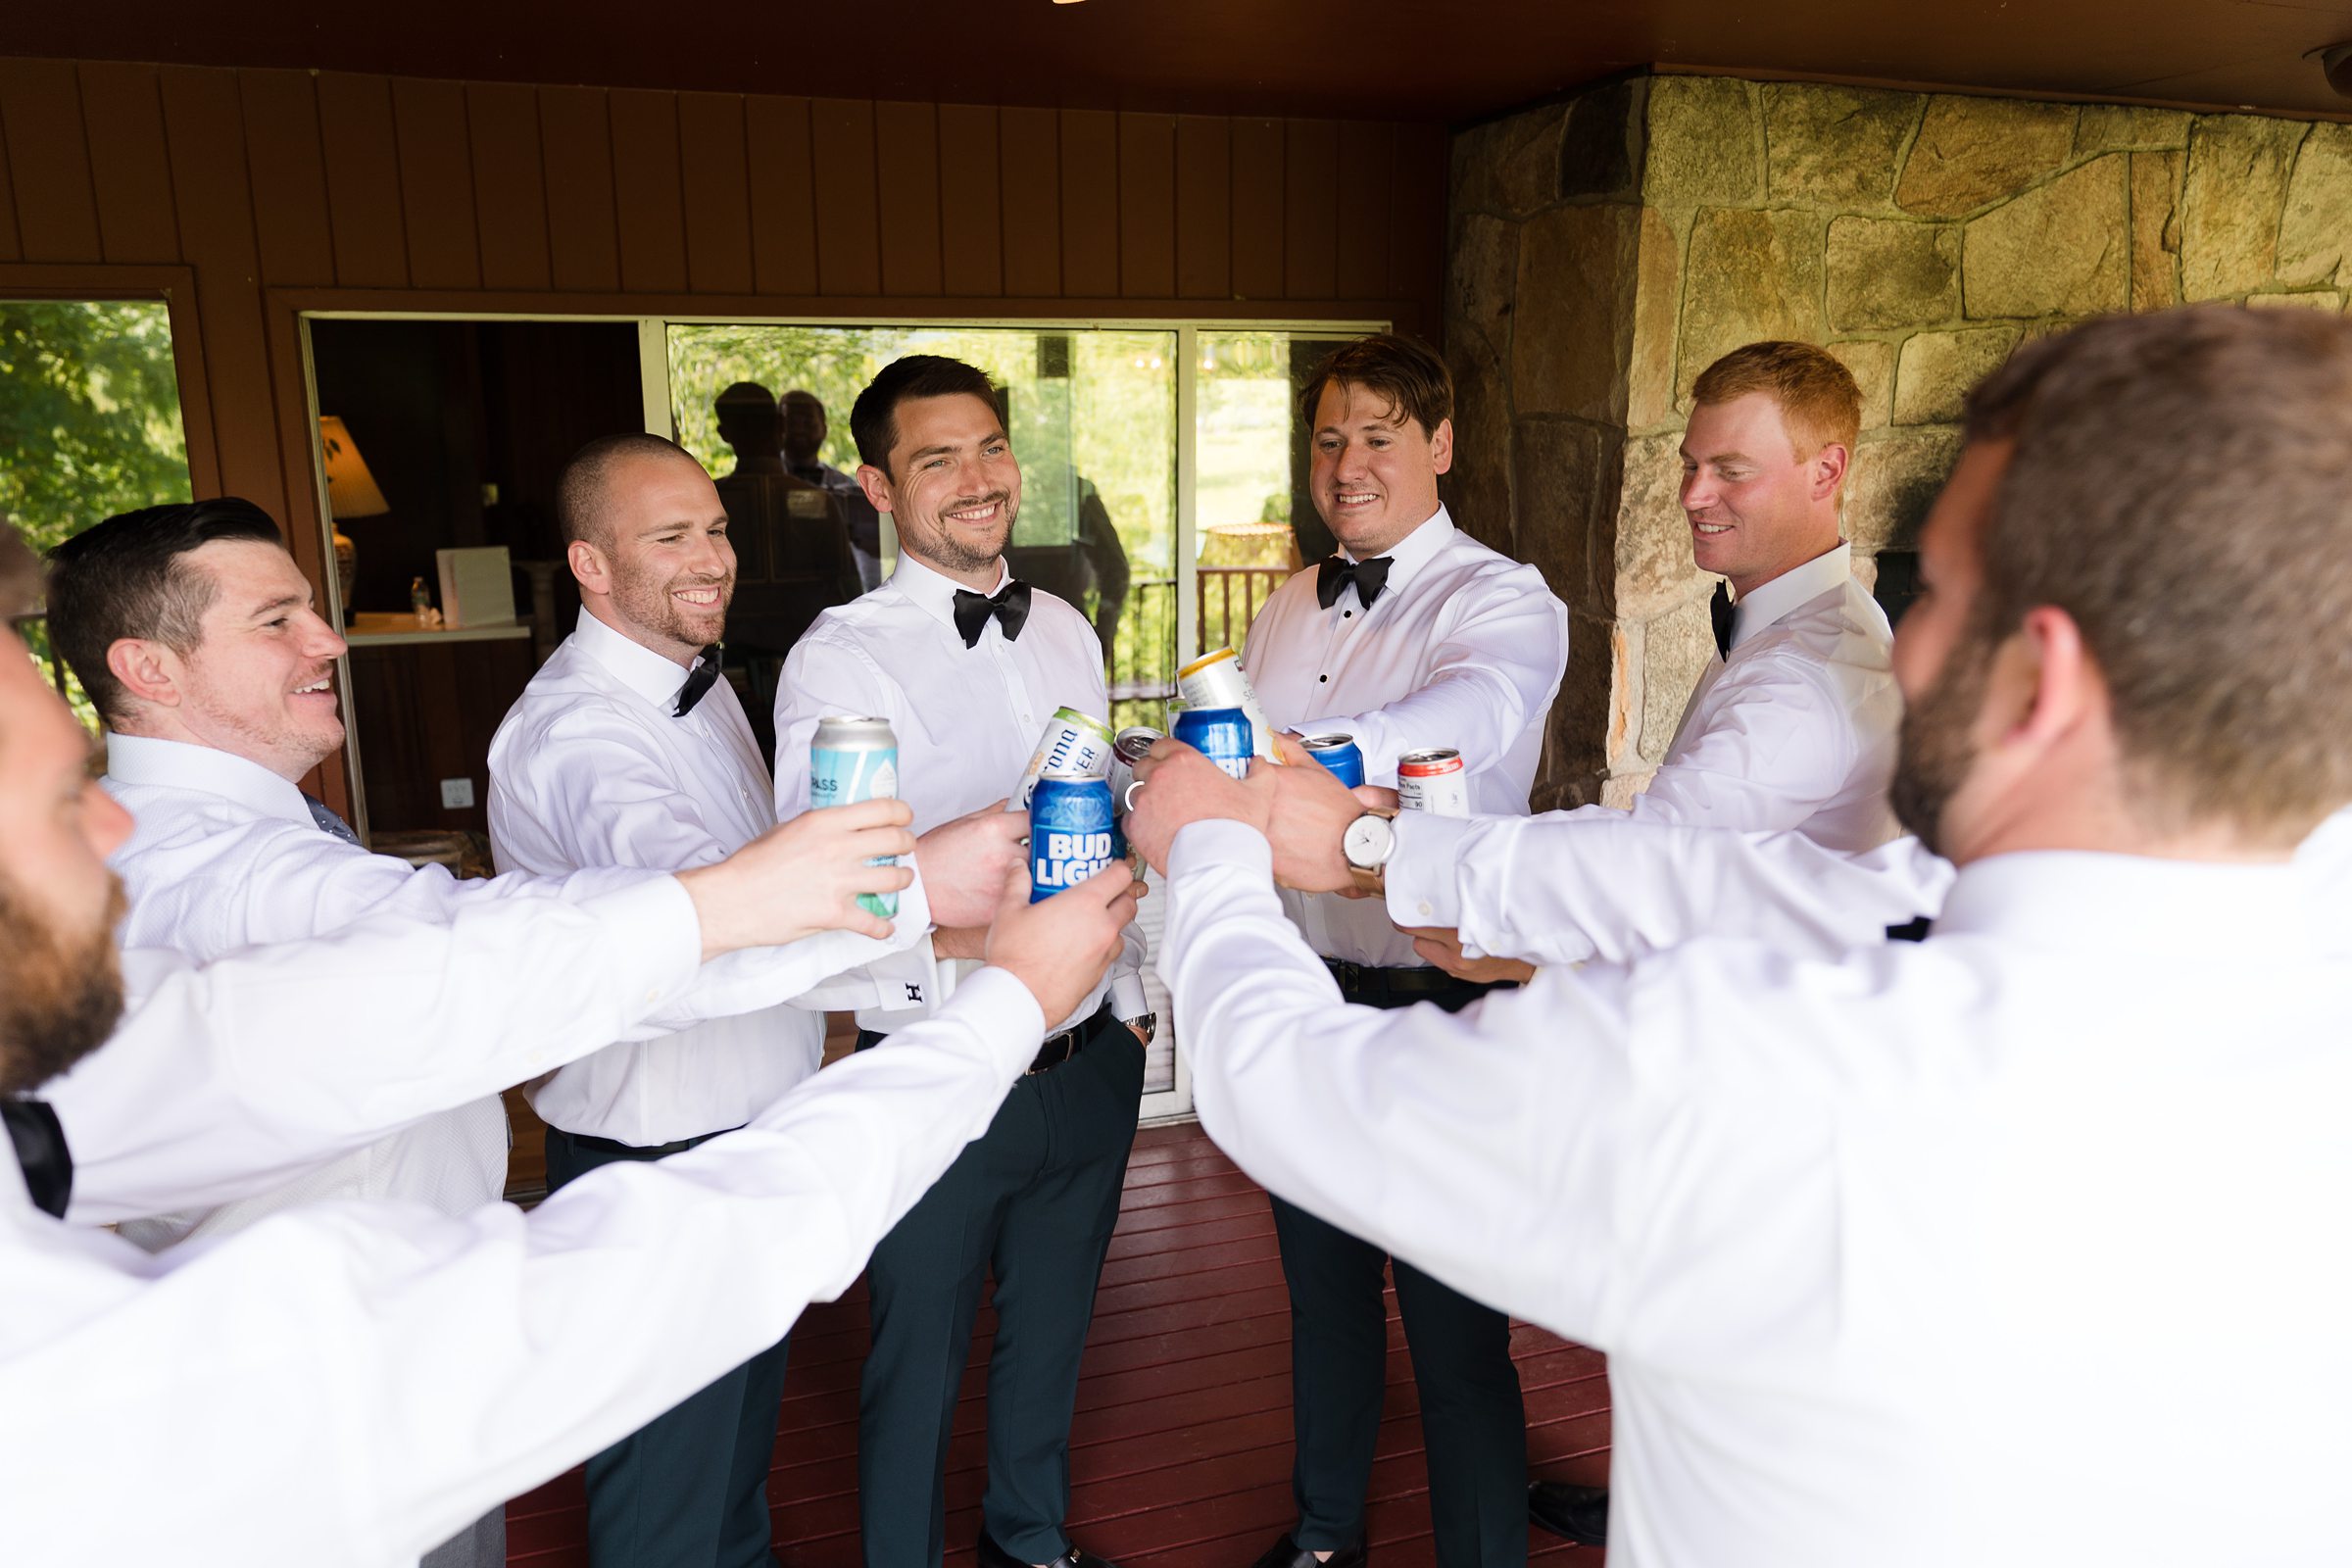 groomsmen doing a toast while getting ready